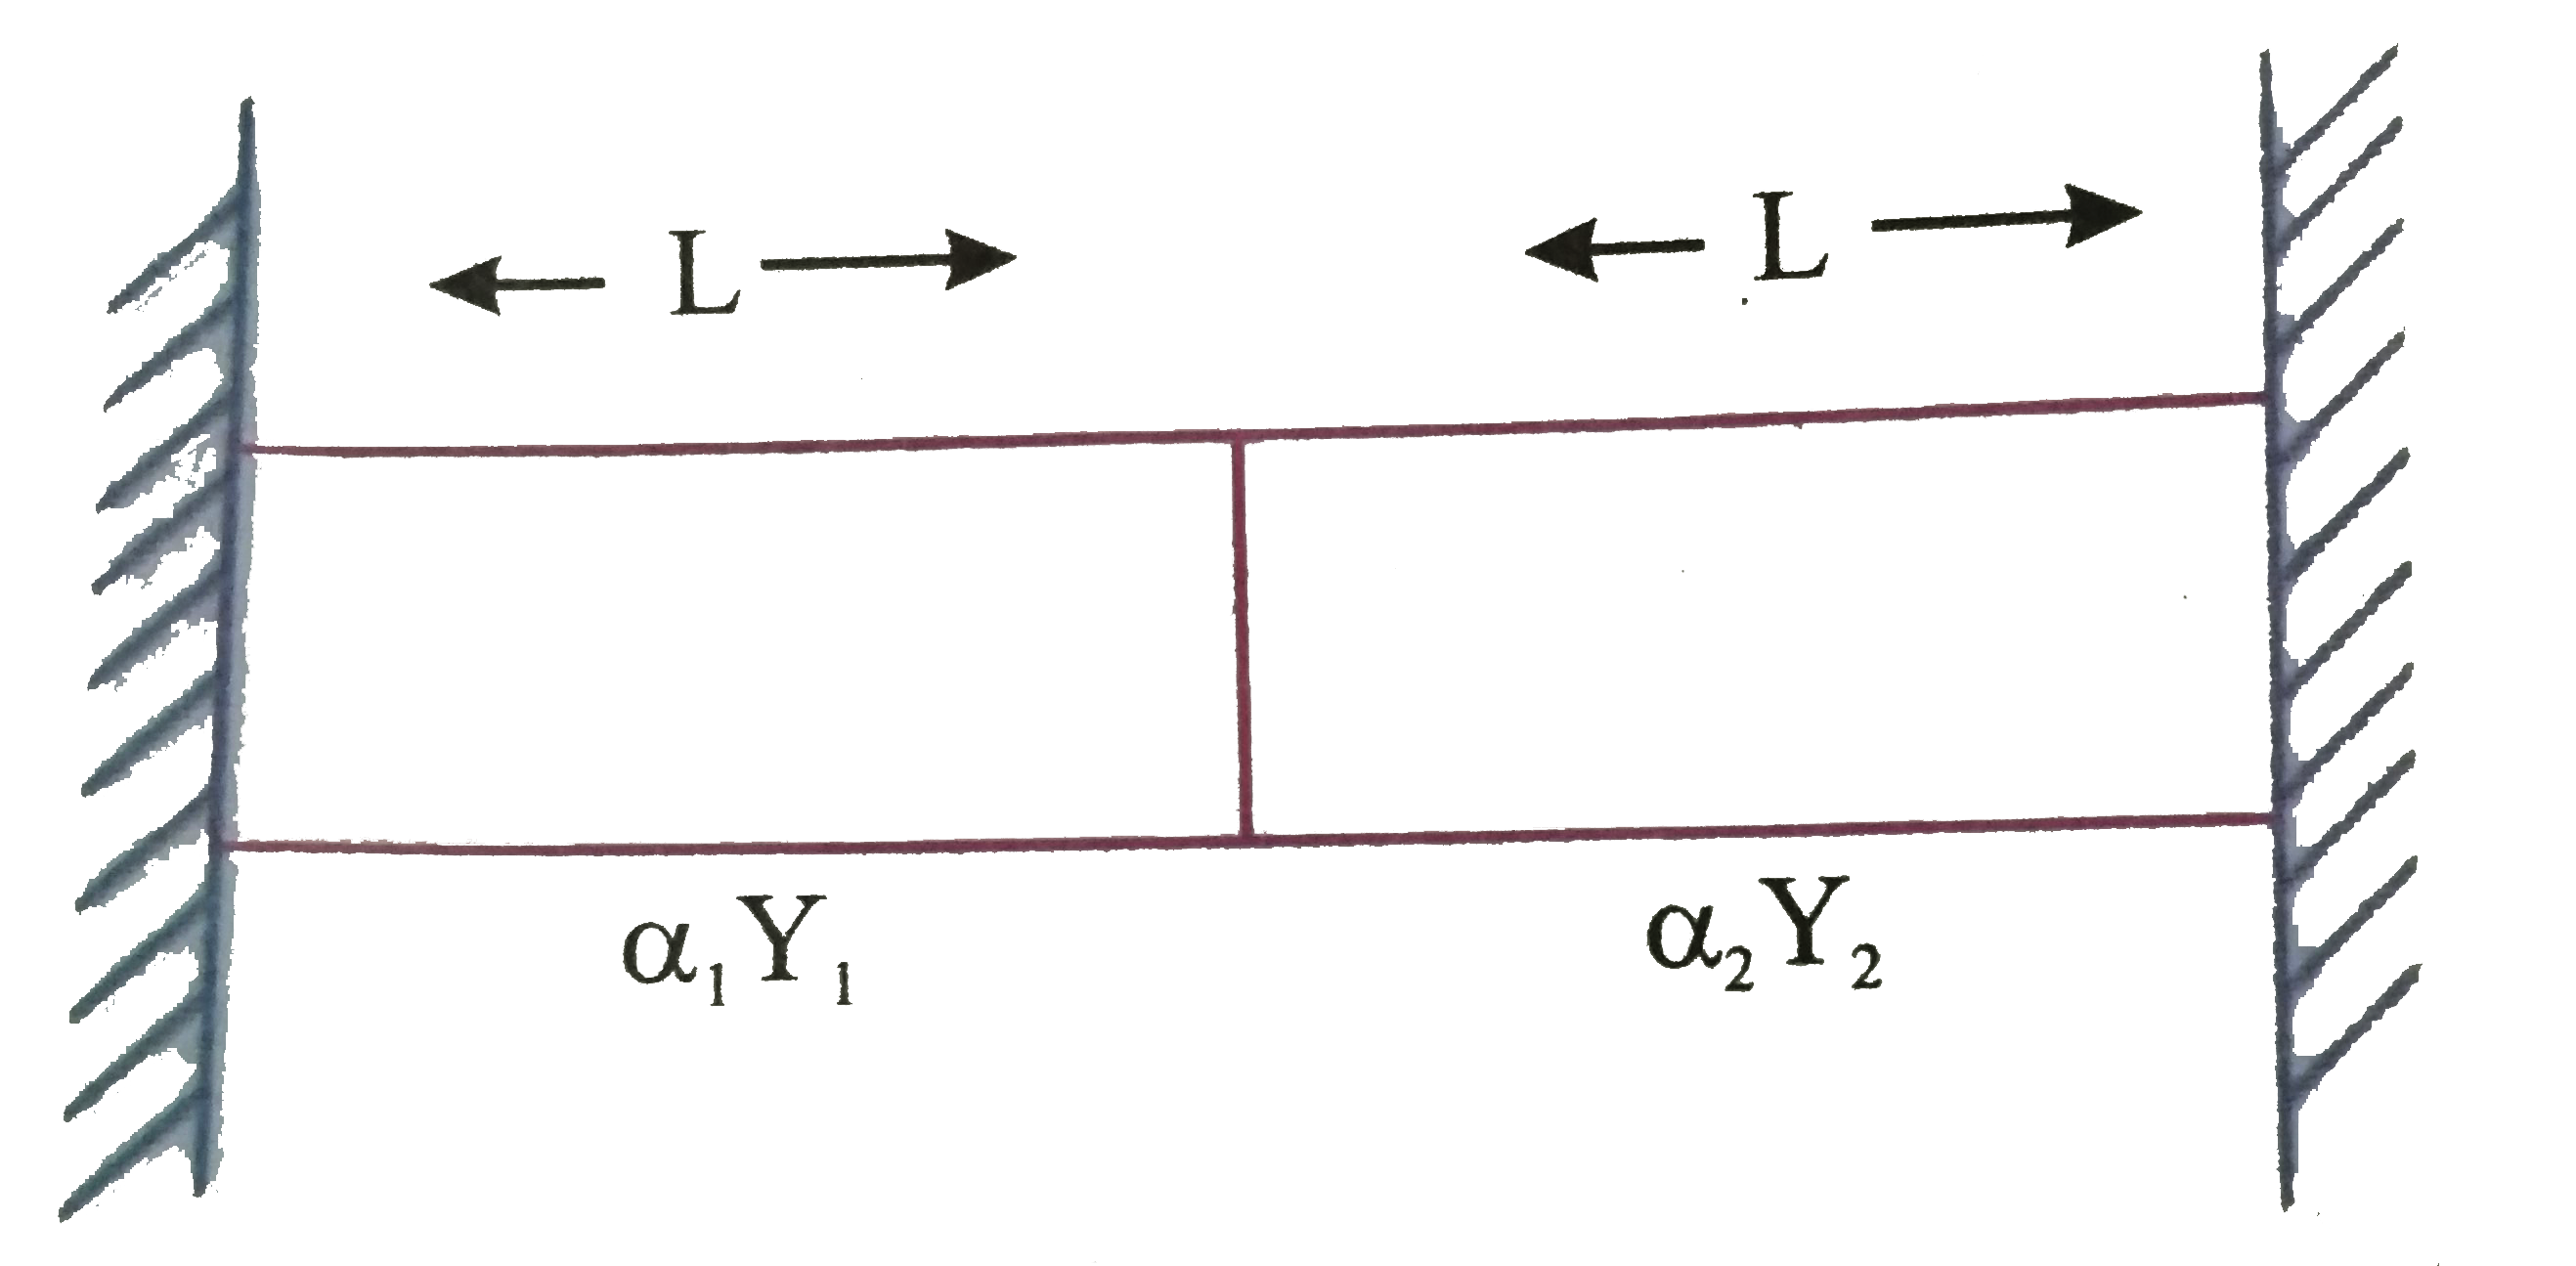 Two metal rods are fixed end to end between two rigid supports as shown in figure. Each rod is of length l and area of cross-section is A. When the systeam is heated up,datermine the condition when the juncation between rods does not shift ? (Y(1) and Y(2) are Young's modulus of materials of rods, alpha(1) and alpha(2) are coefficients of linear expansion)